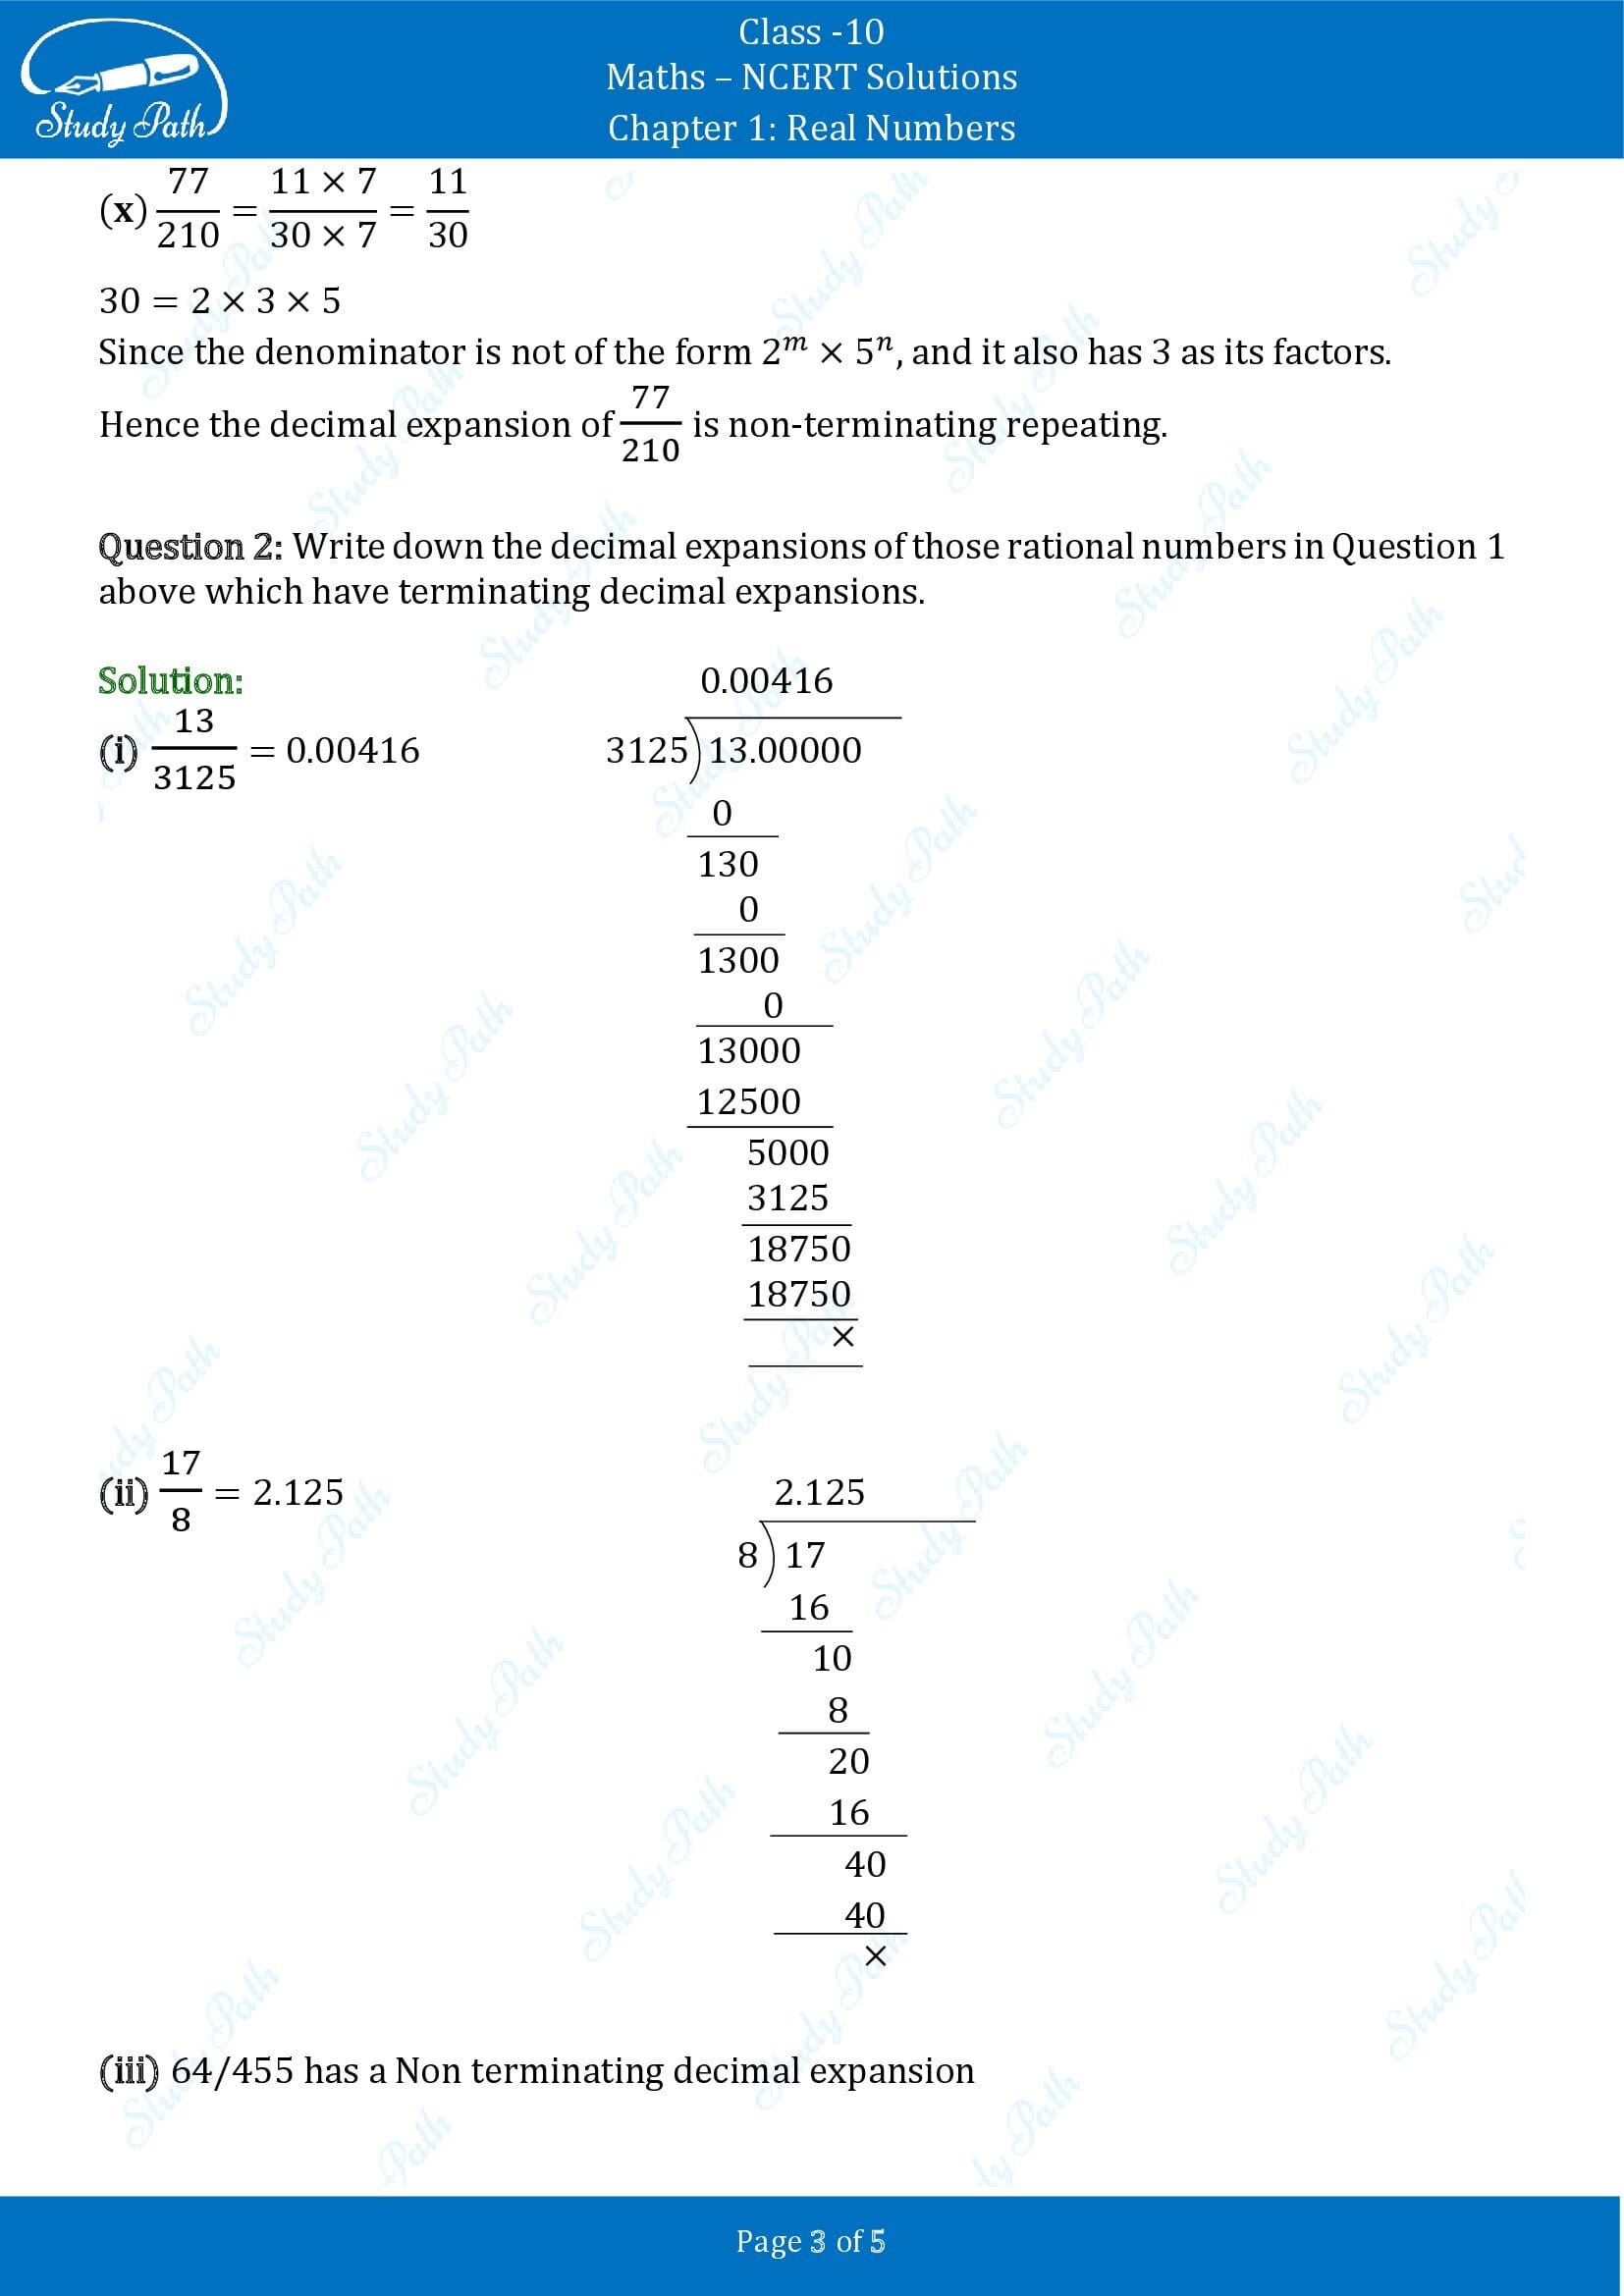 NCERT Solutions for Class 10 Maths Chapter 1 Real Numbers Exercise 1.4 00003